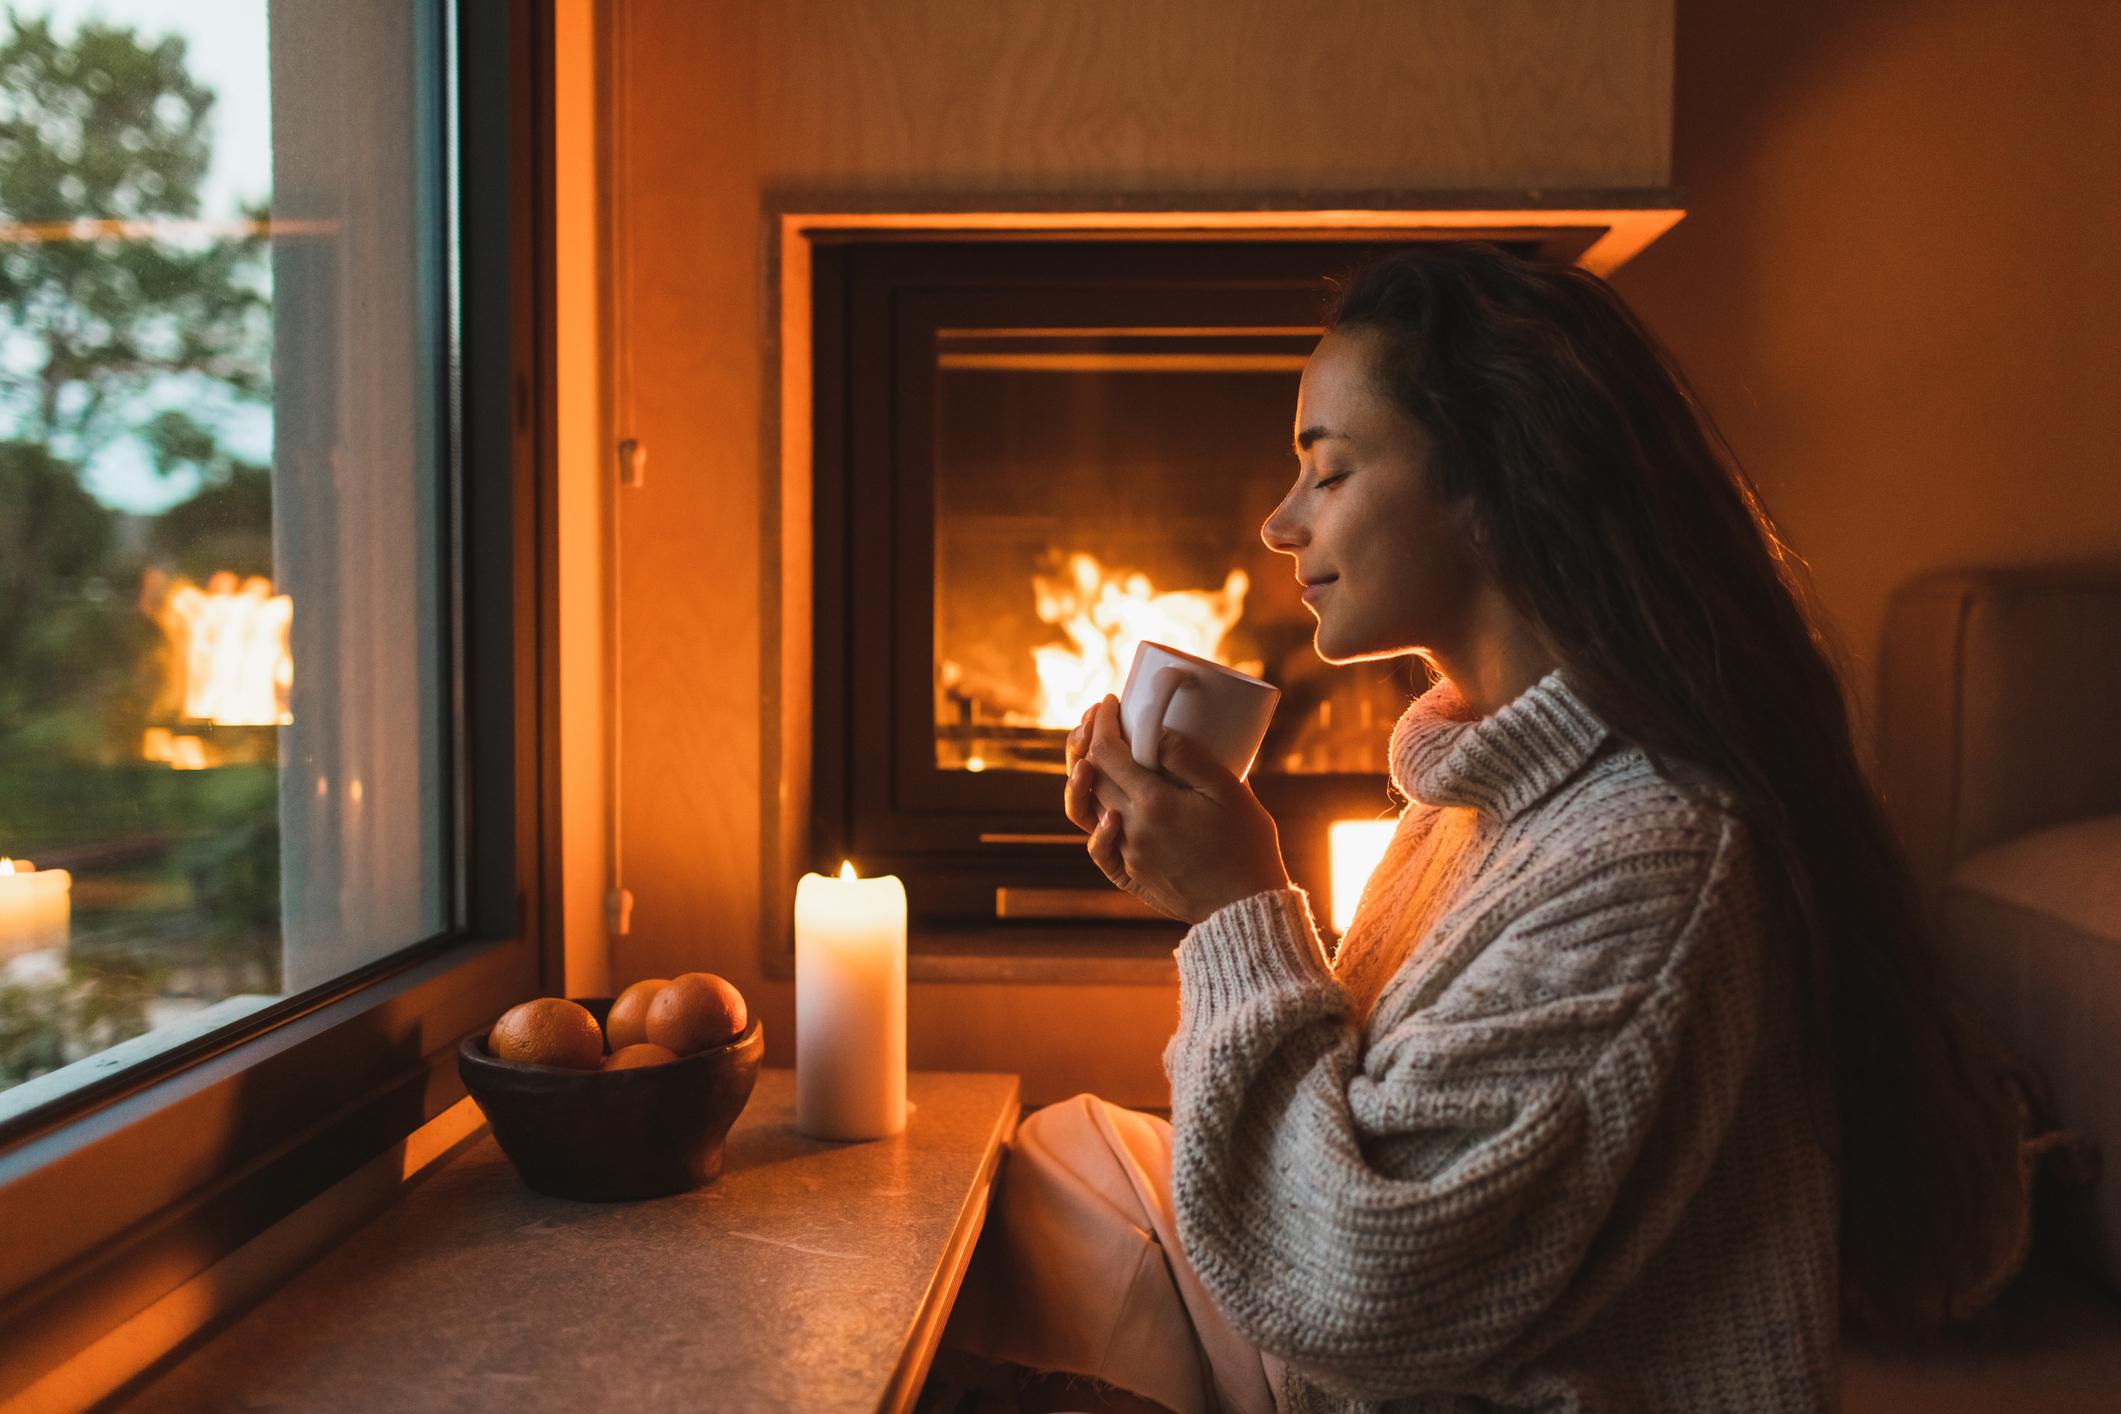  A happy woman sat in front of a warm fire and a lit candle, holding a mug of tea with her eyes closed. 